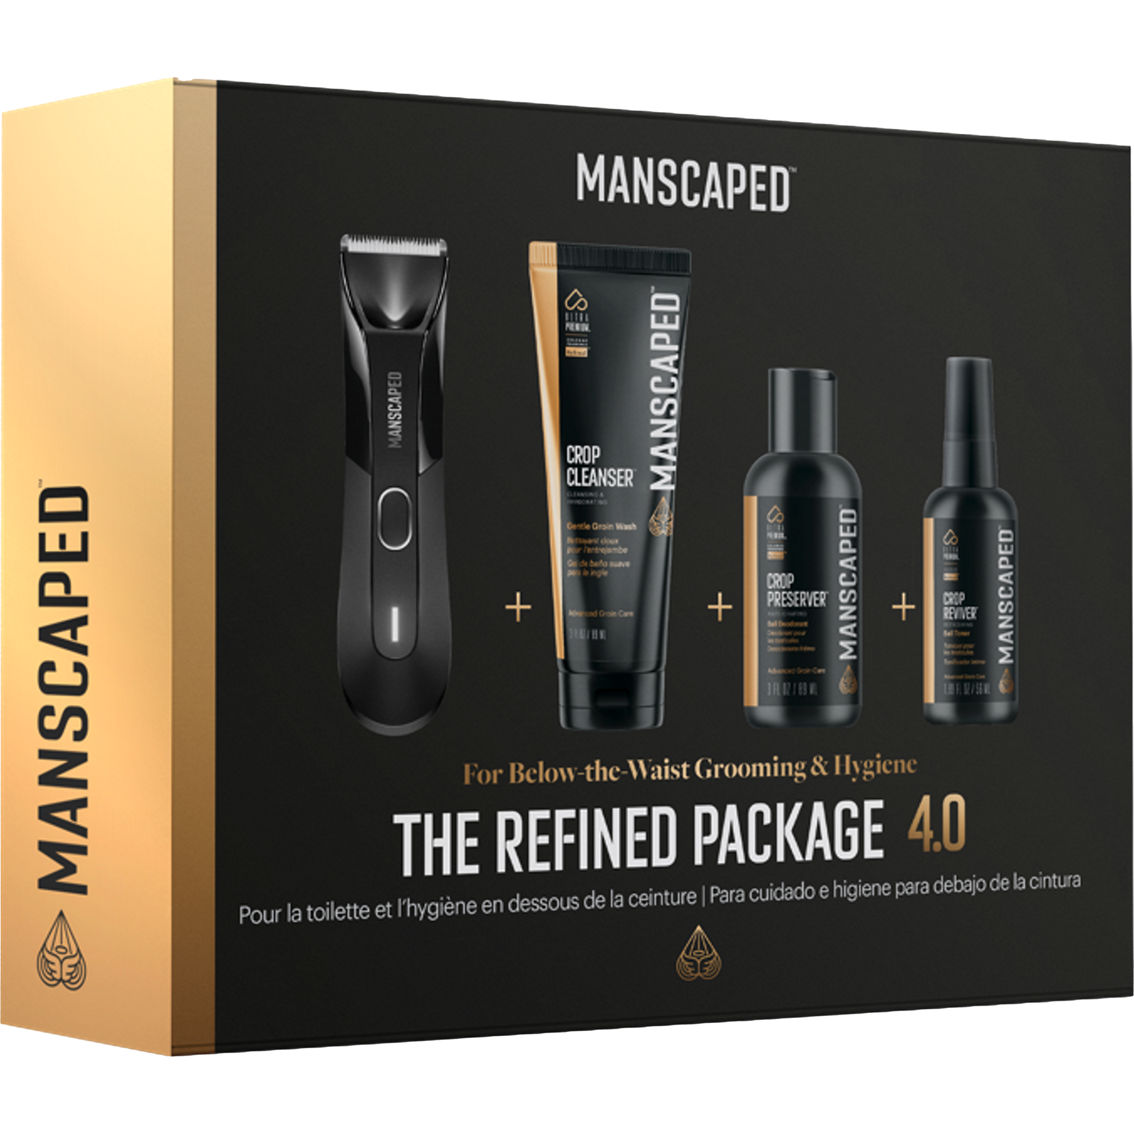 Manscaped Refined Package 4.0